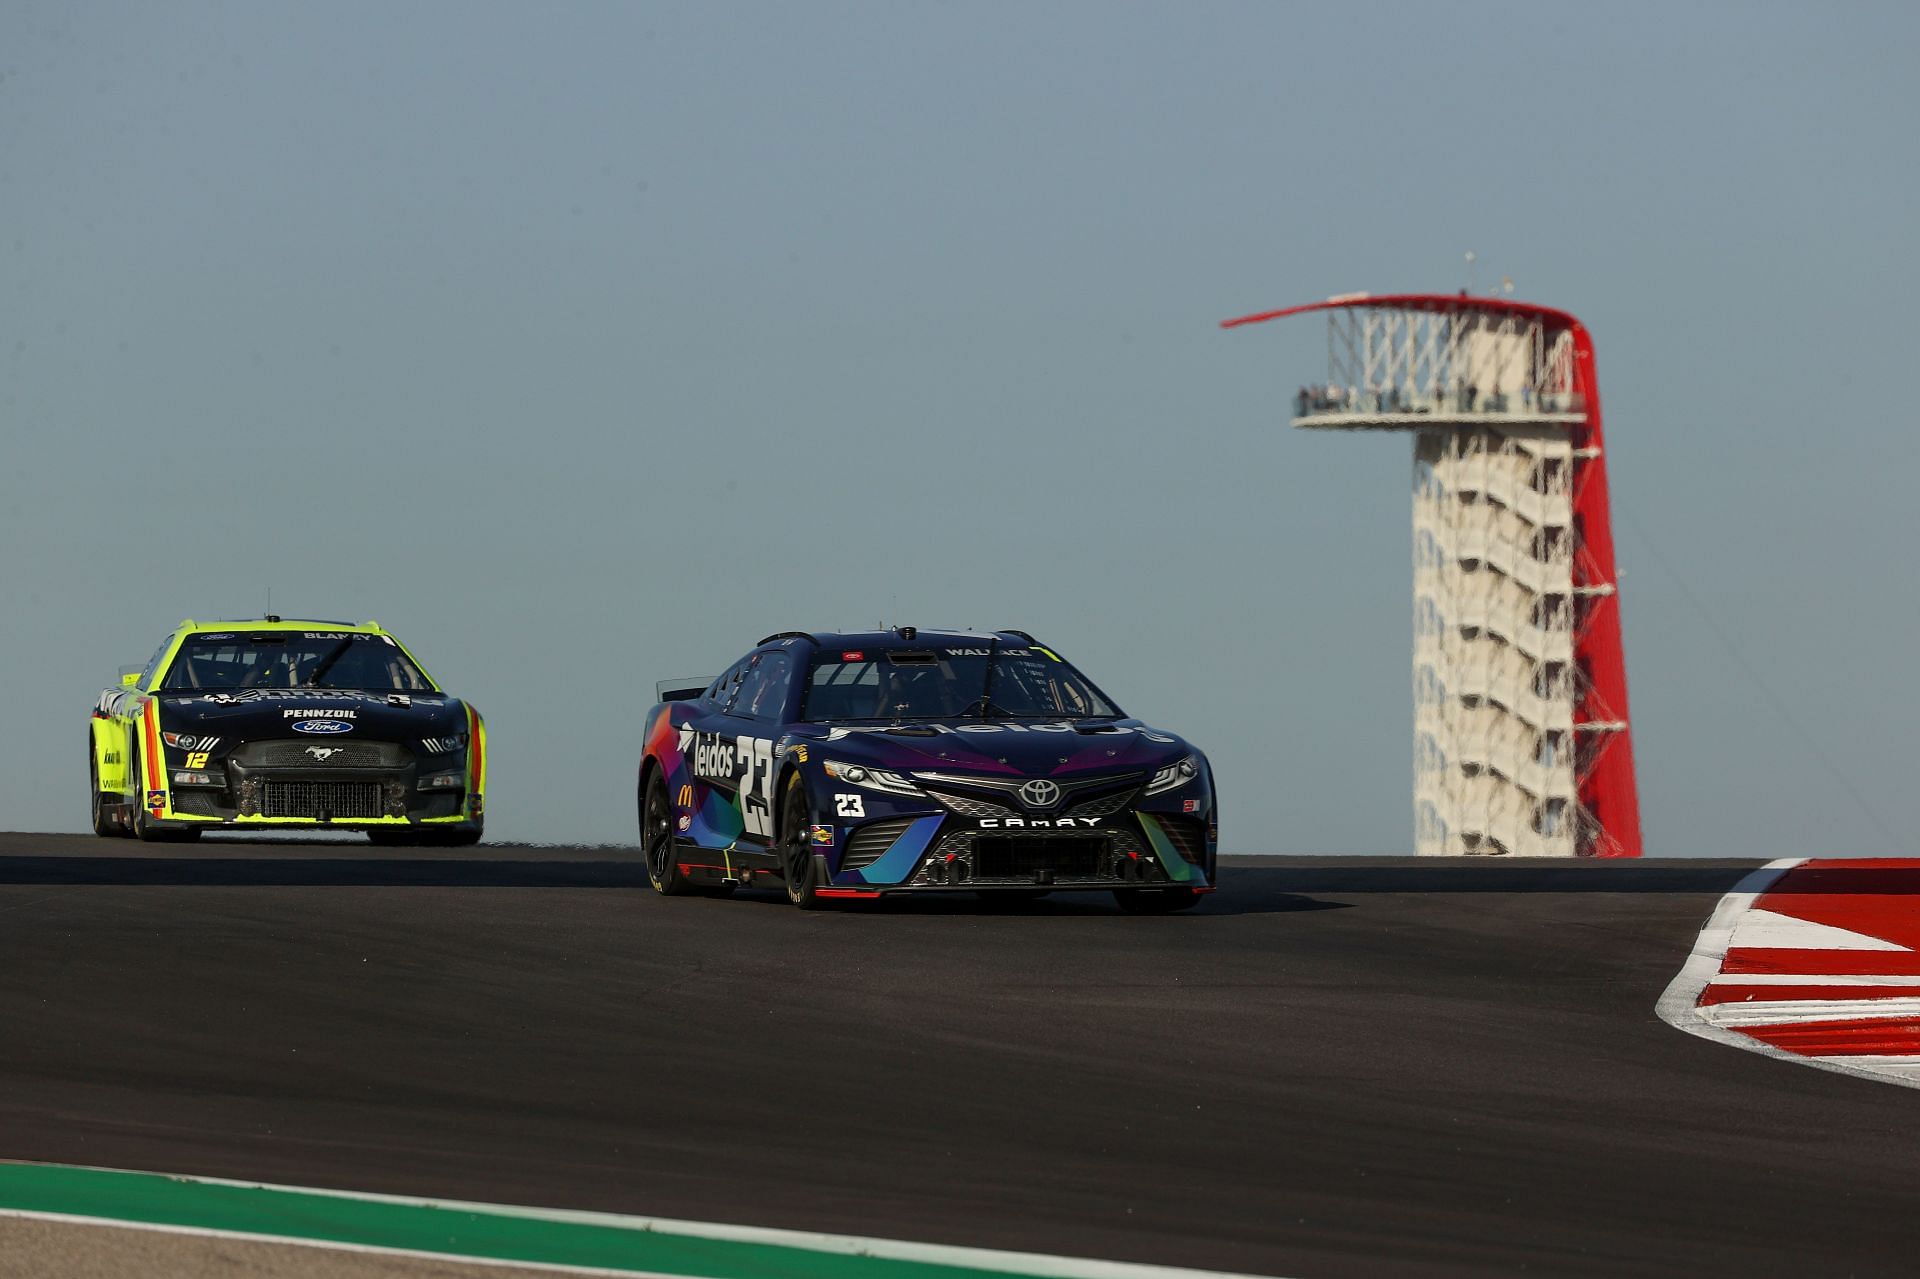 Bubba Wallace Jr. (#23)drives during practice for the NASCAR Cup Series Echopark Automotive Grand Prix at Circuit of The Americas